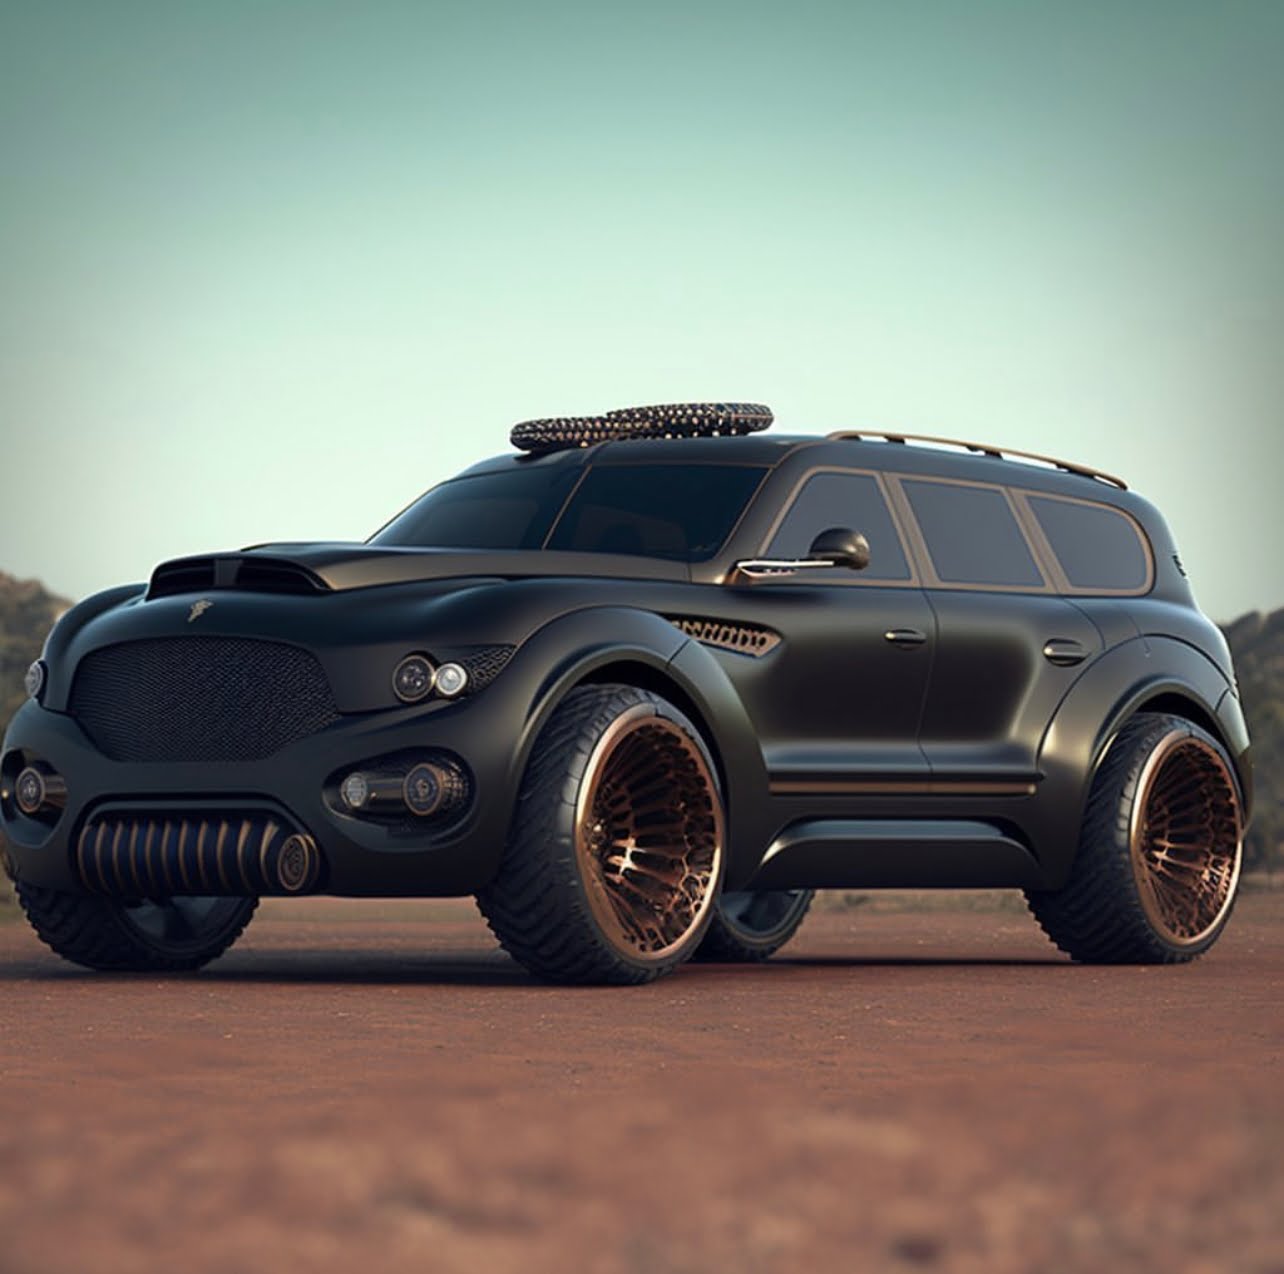 Dreaming Cars Concept Designed by flybyartist